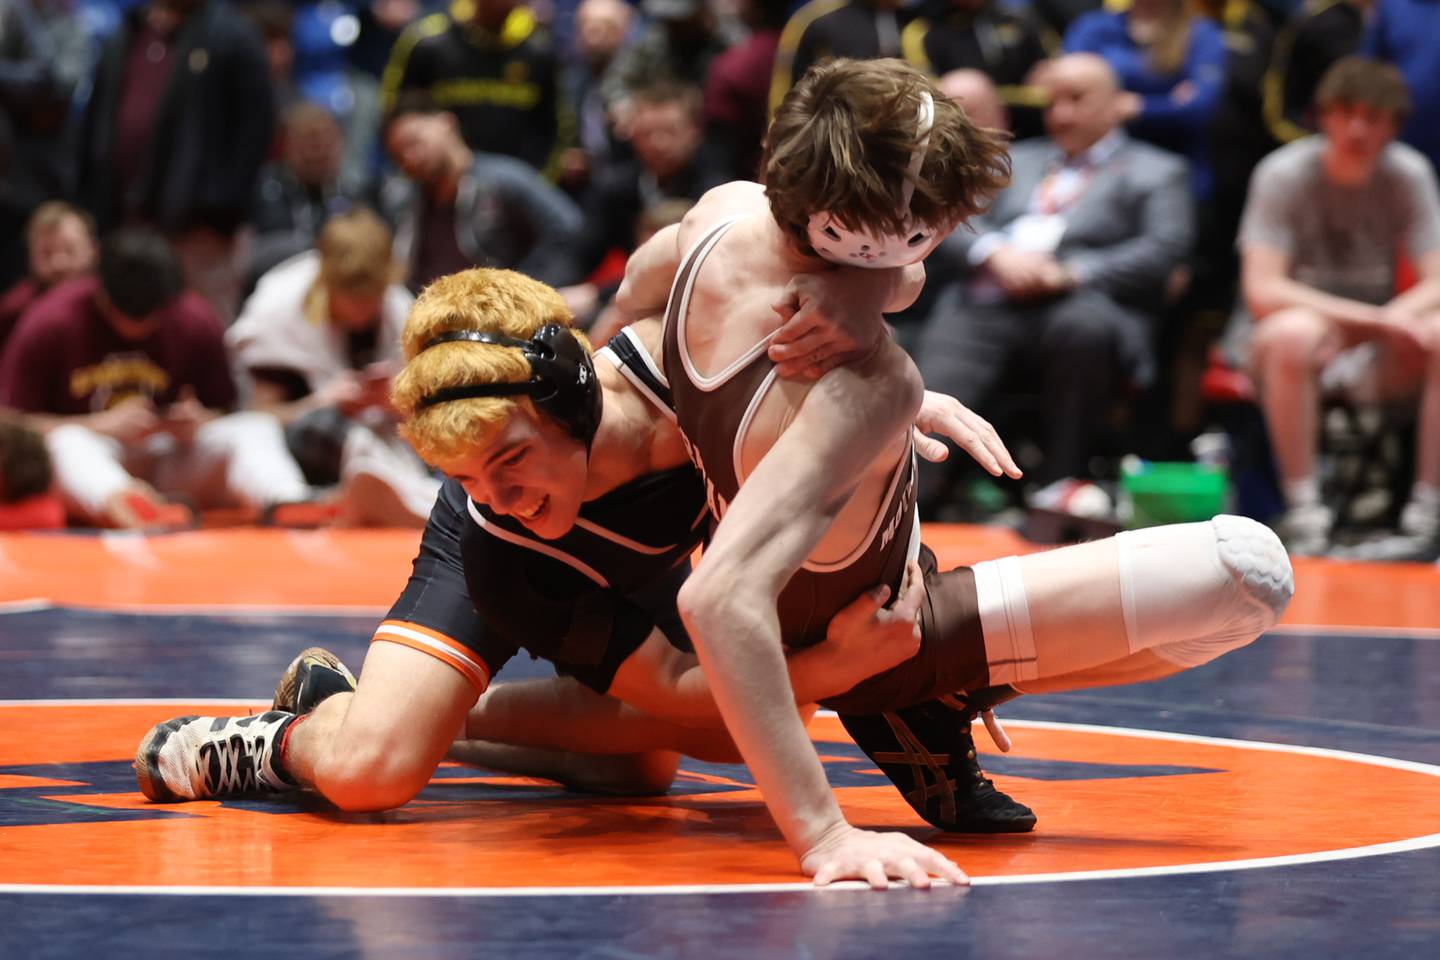 DeKalb’s Danny Curran throws Mount Carmel’s Eddie Enright to the mat in the Class 3A 132 pound dual team championship match at Grossinger Motor Arena in Bloomington. Saturday, Feb. 26, 2022, in Champaign.